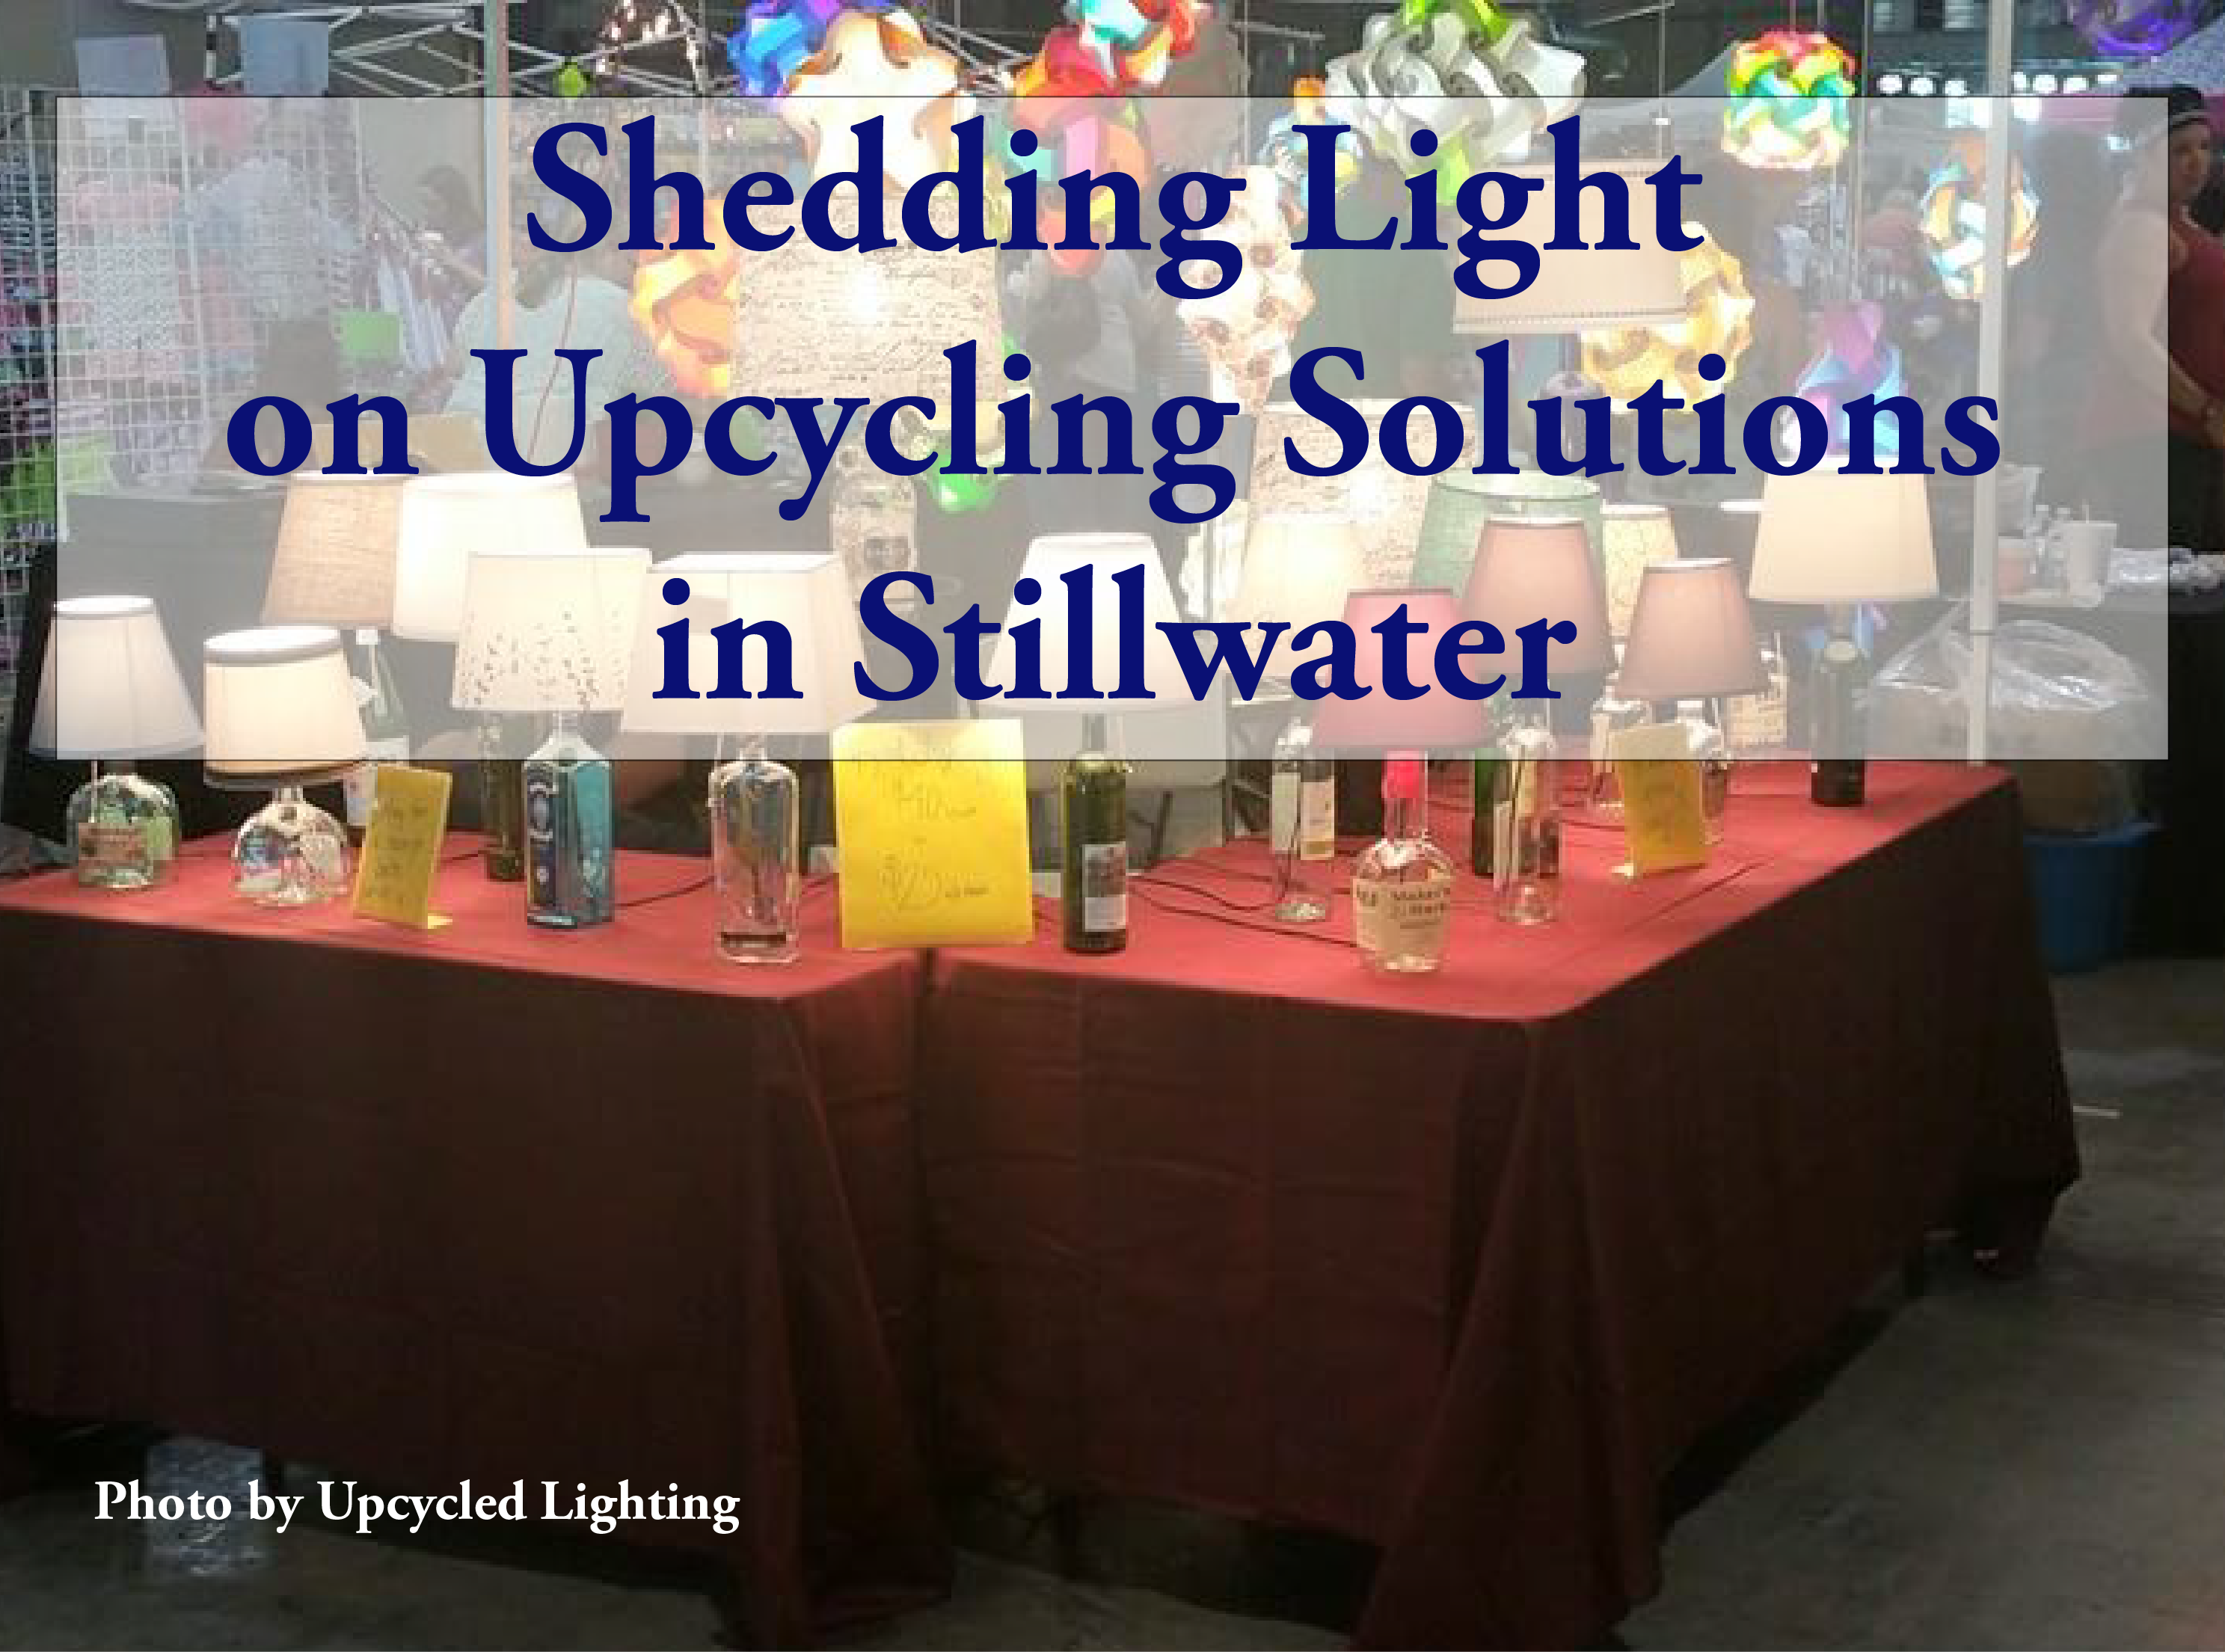 Shedding Light on Upcycling Solutions in Stillwater